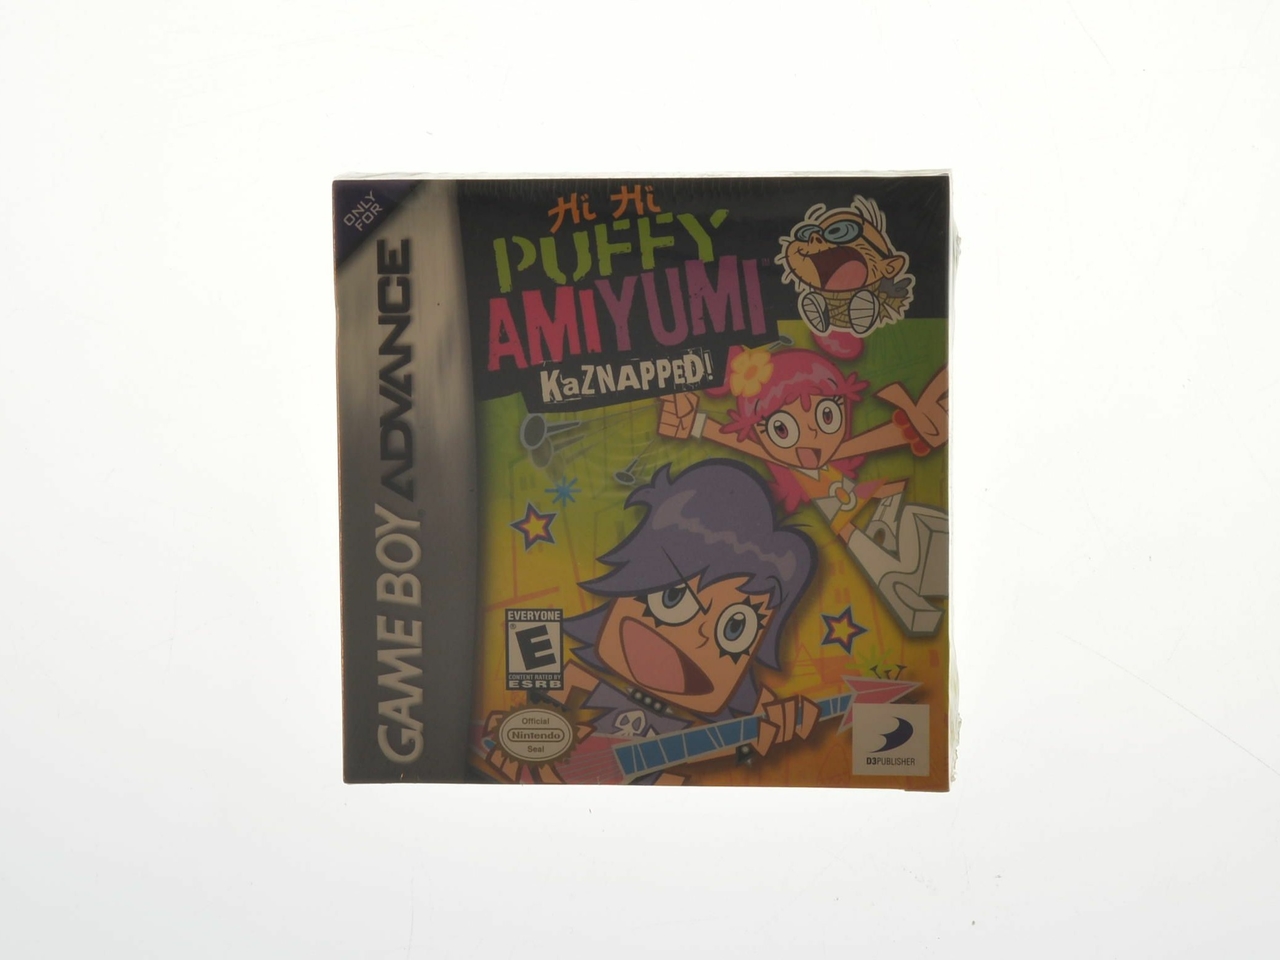 Puffy AmiYumi: Kaznapped! - Gameboy Advance Games [Complete]